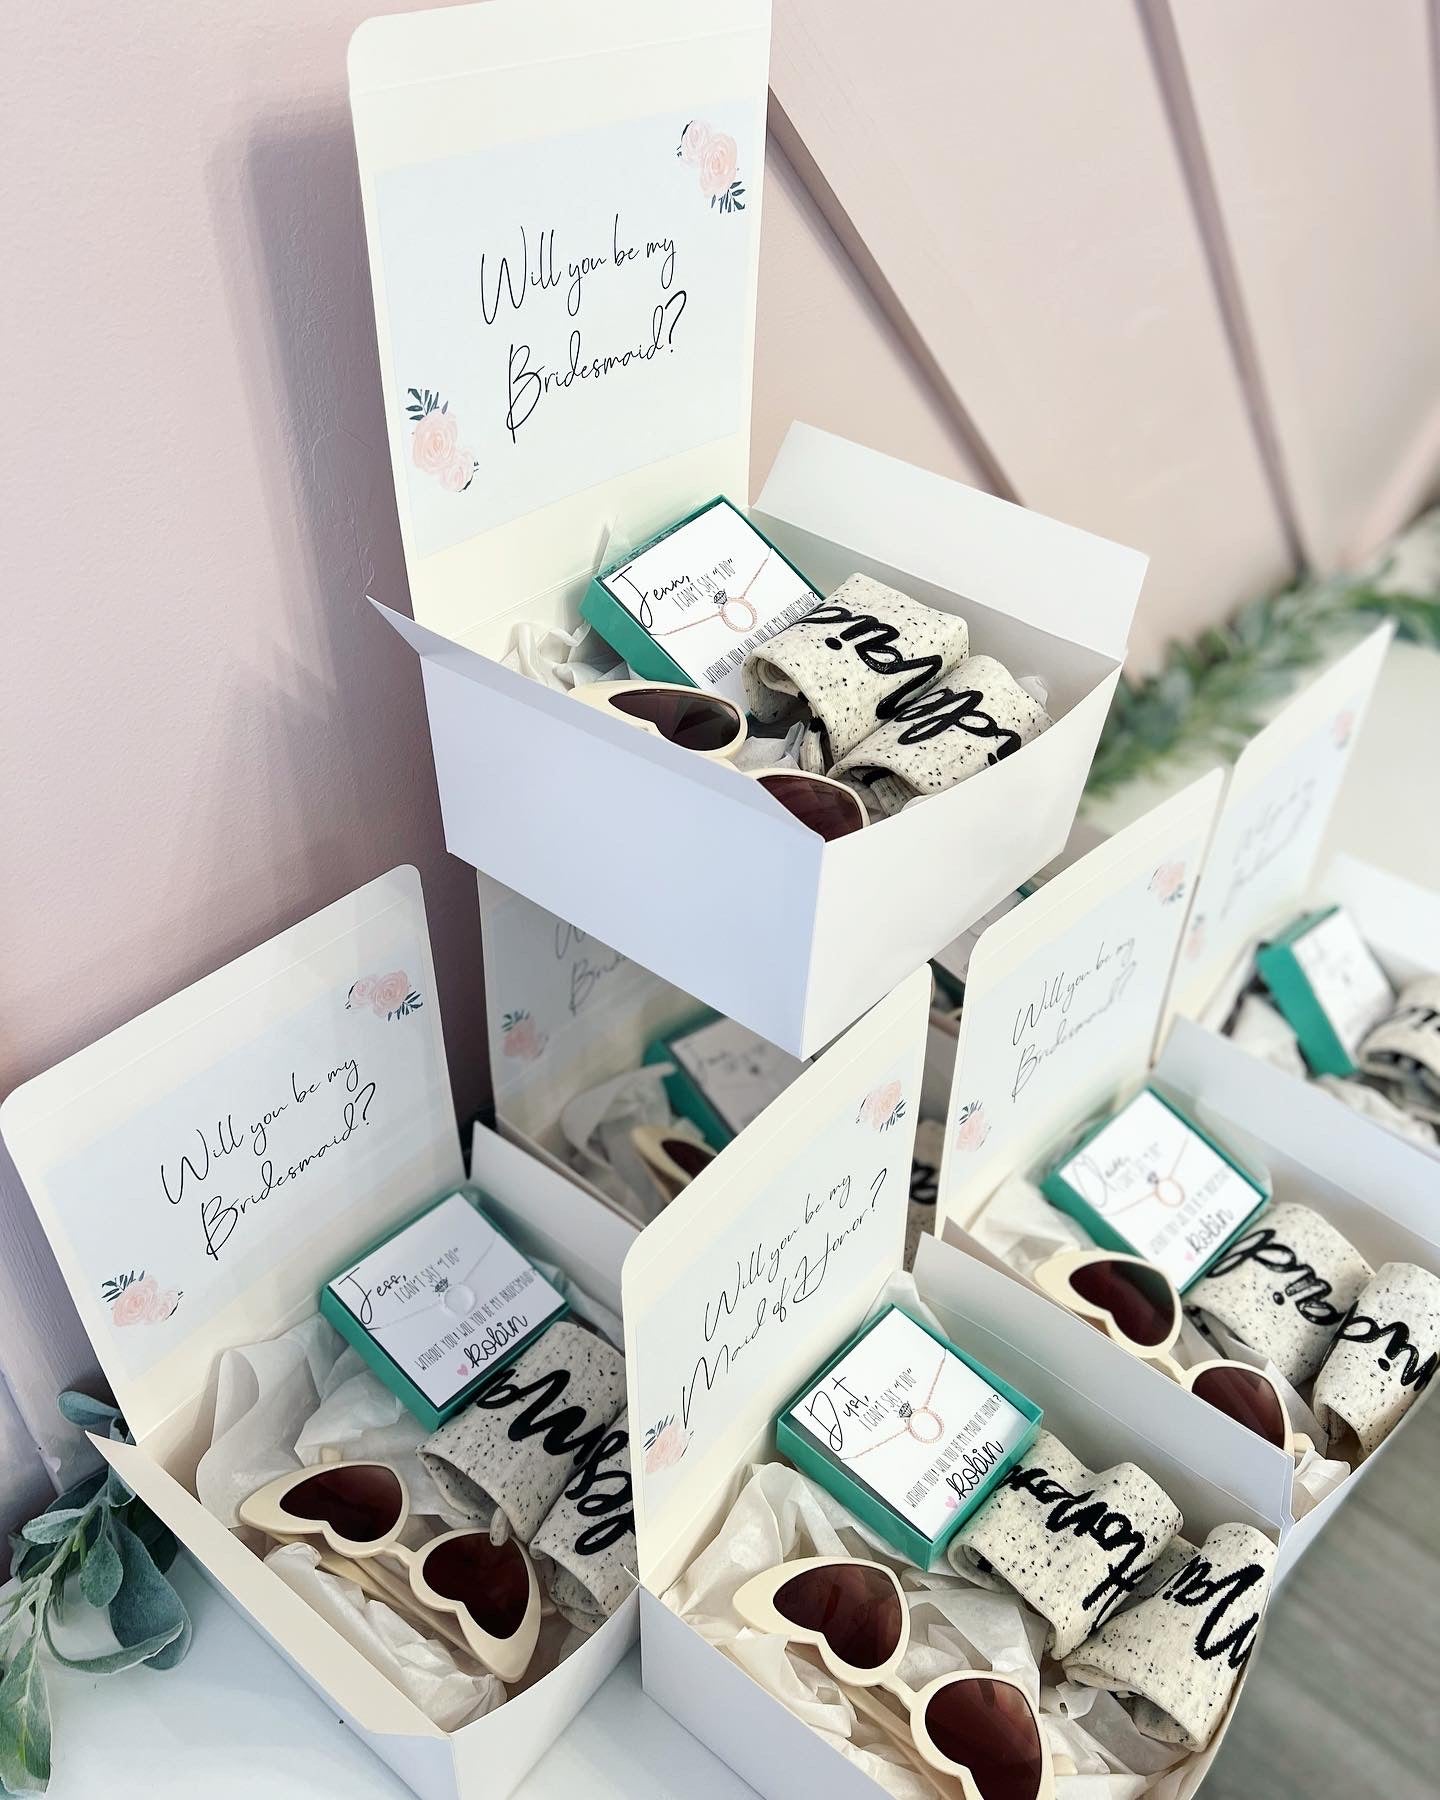 Bridesmaid Proposal Box with Socks, Glasses & Necklace